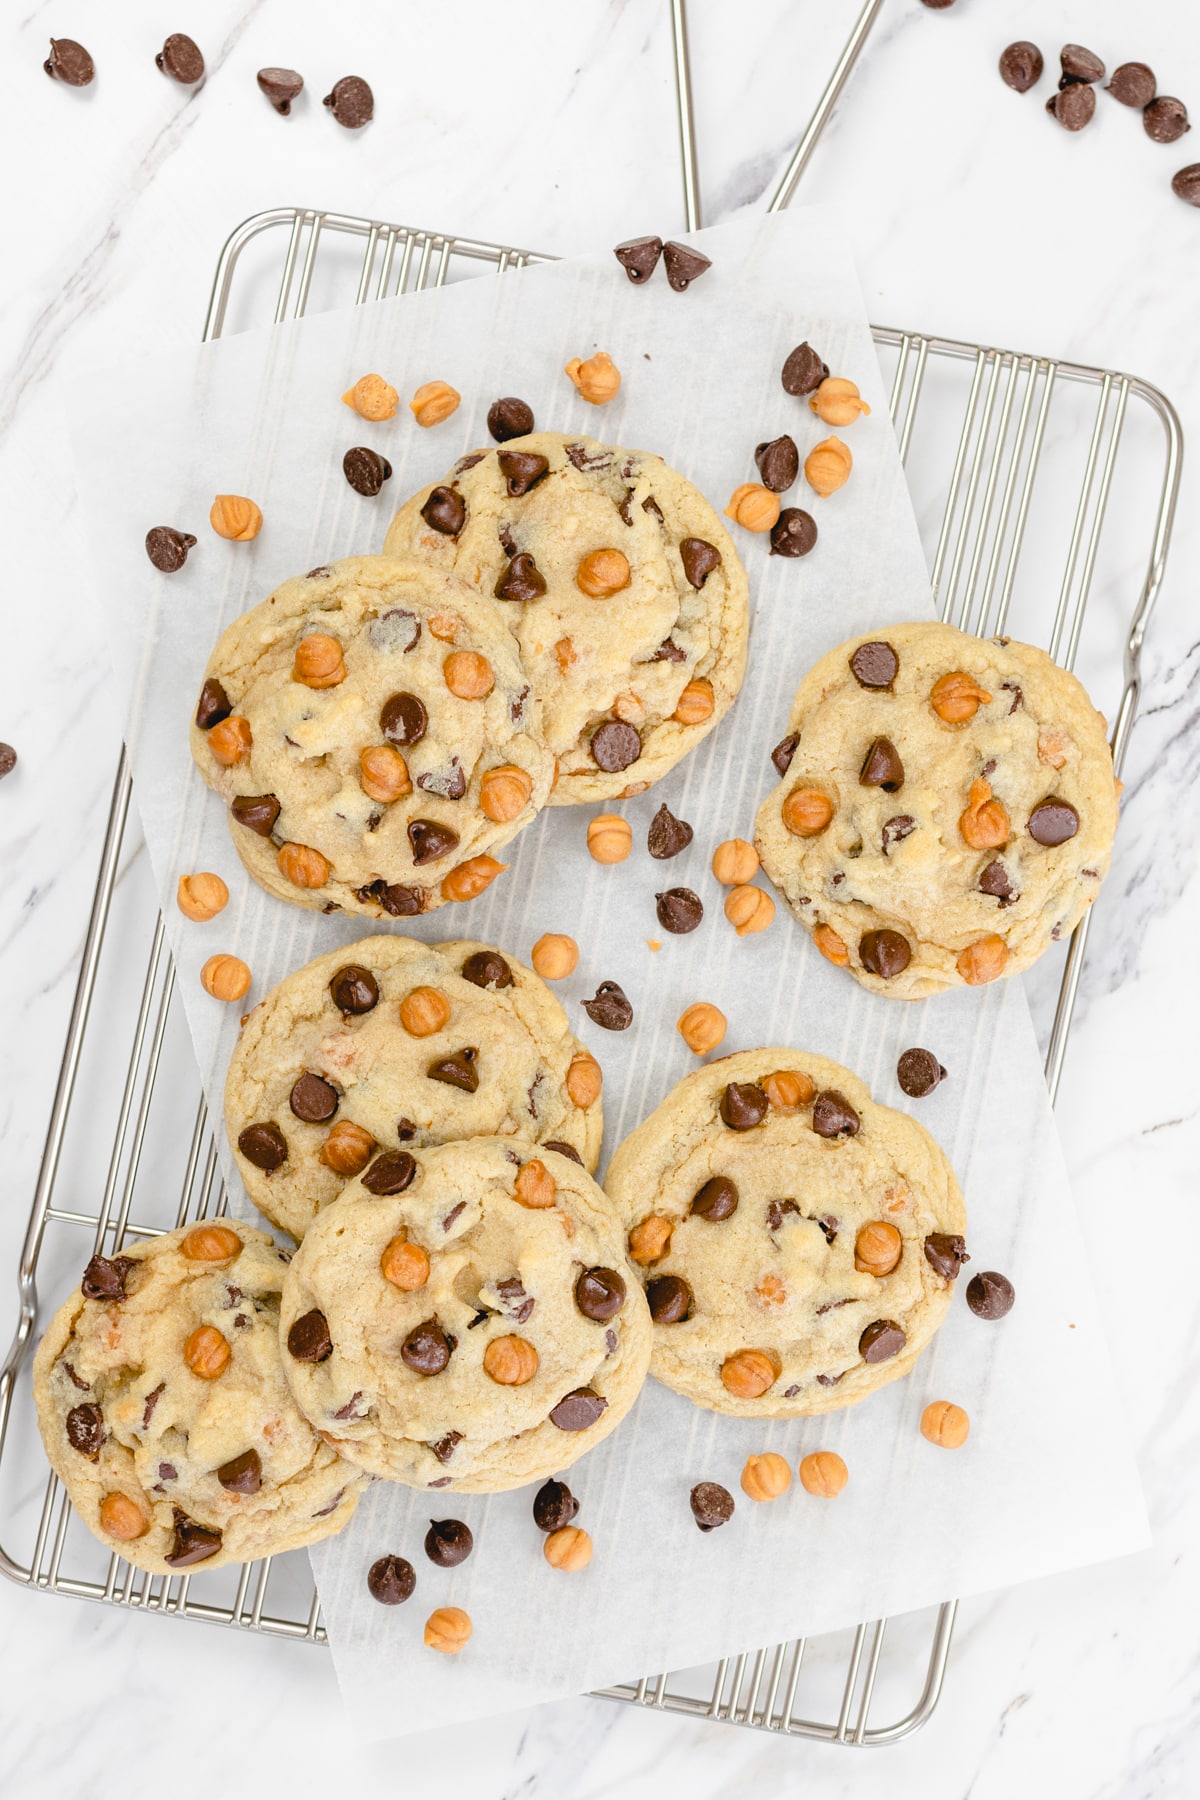 Top view of Caramel Chocolate Chip Cookies on a wire rack with caramel chips and chocolate chips dotted around them.